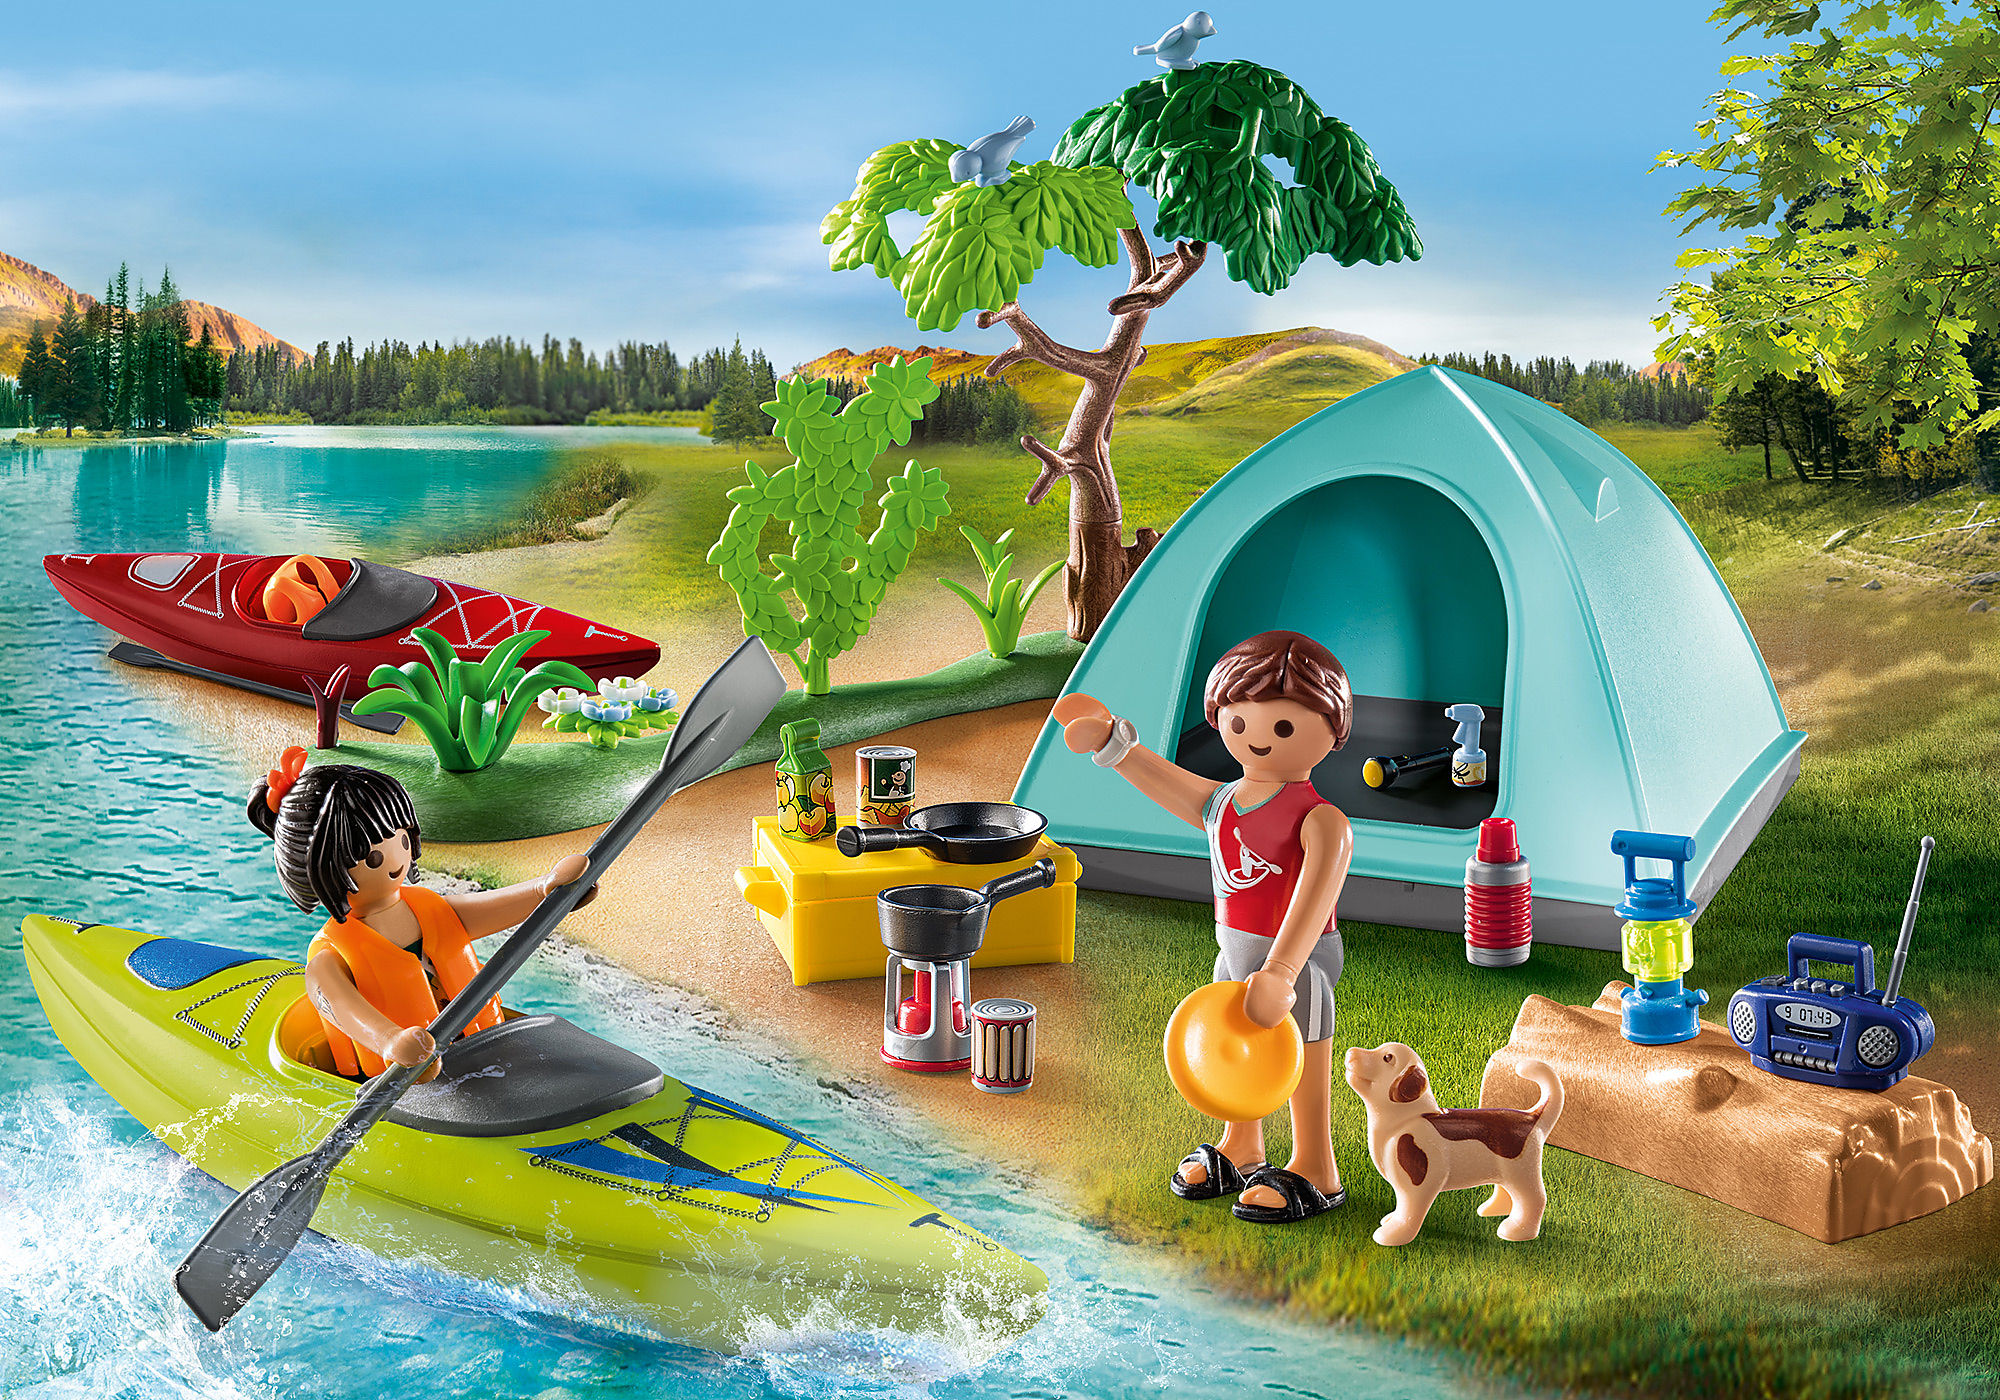 Campsite with Campfire - 71425